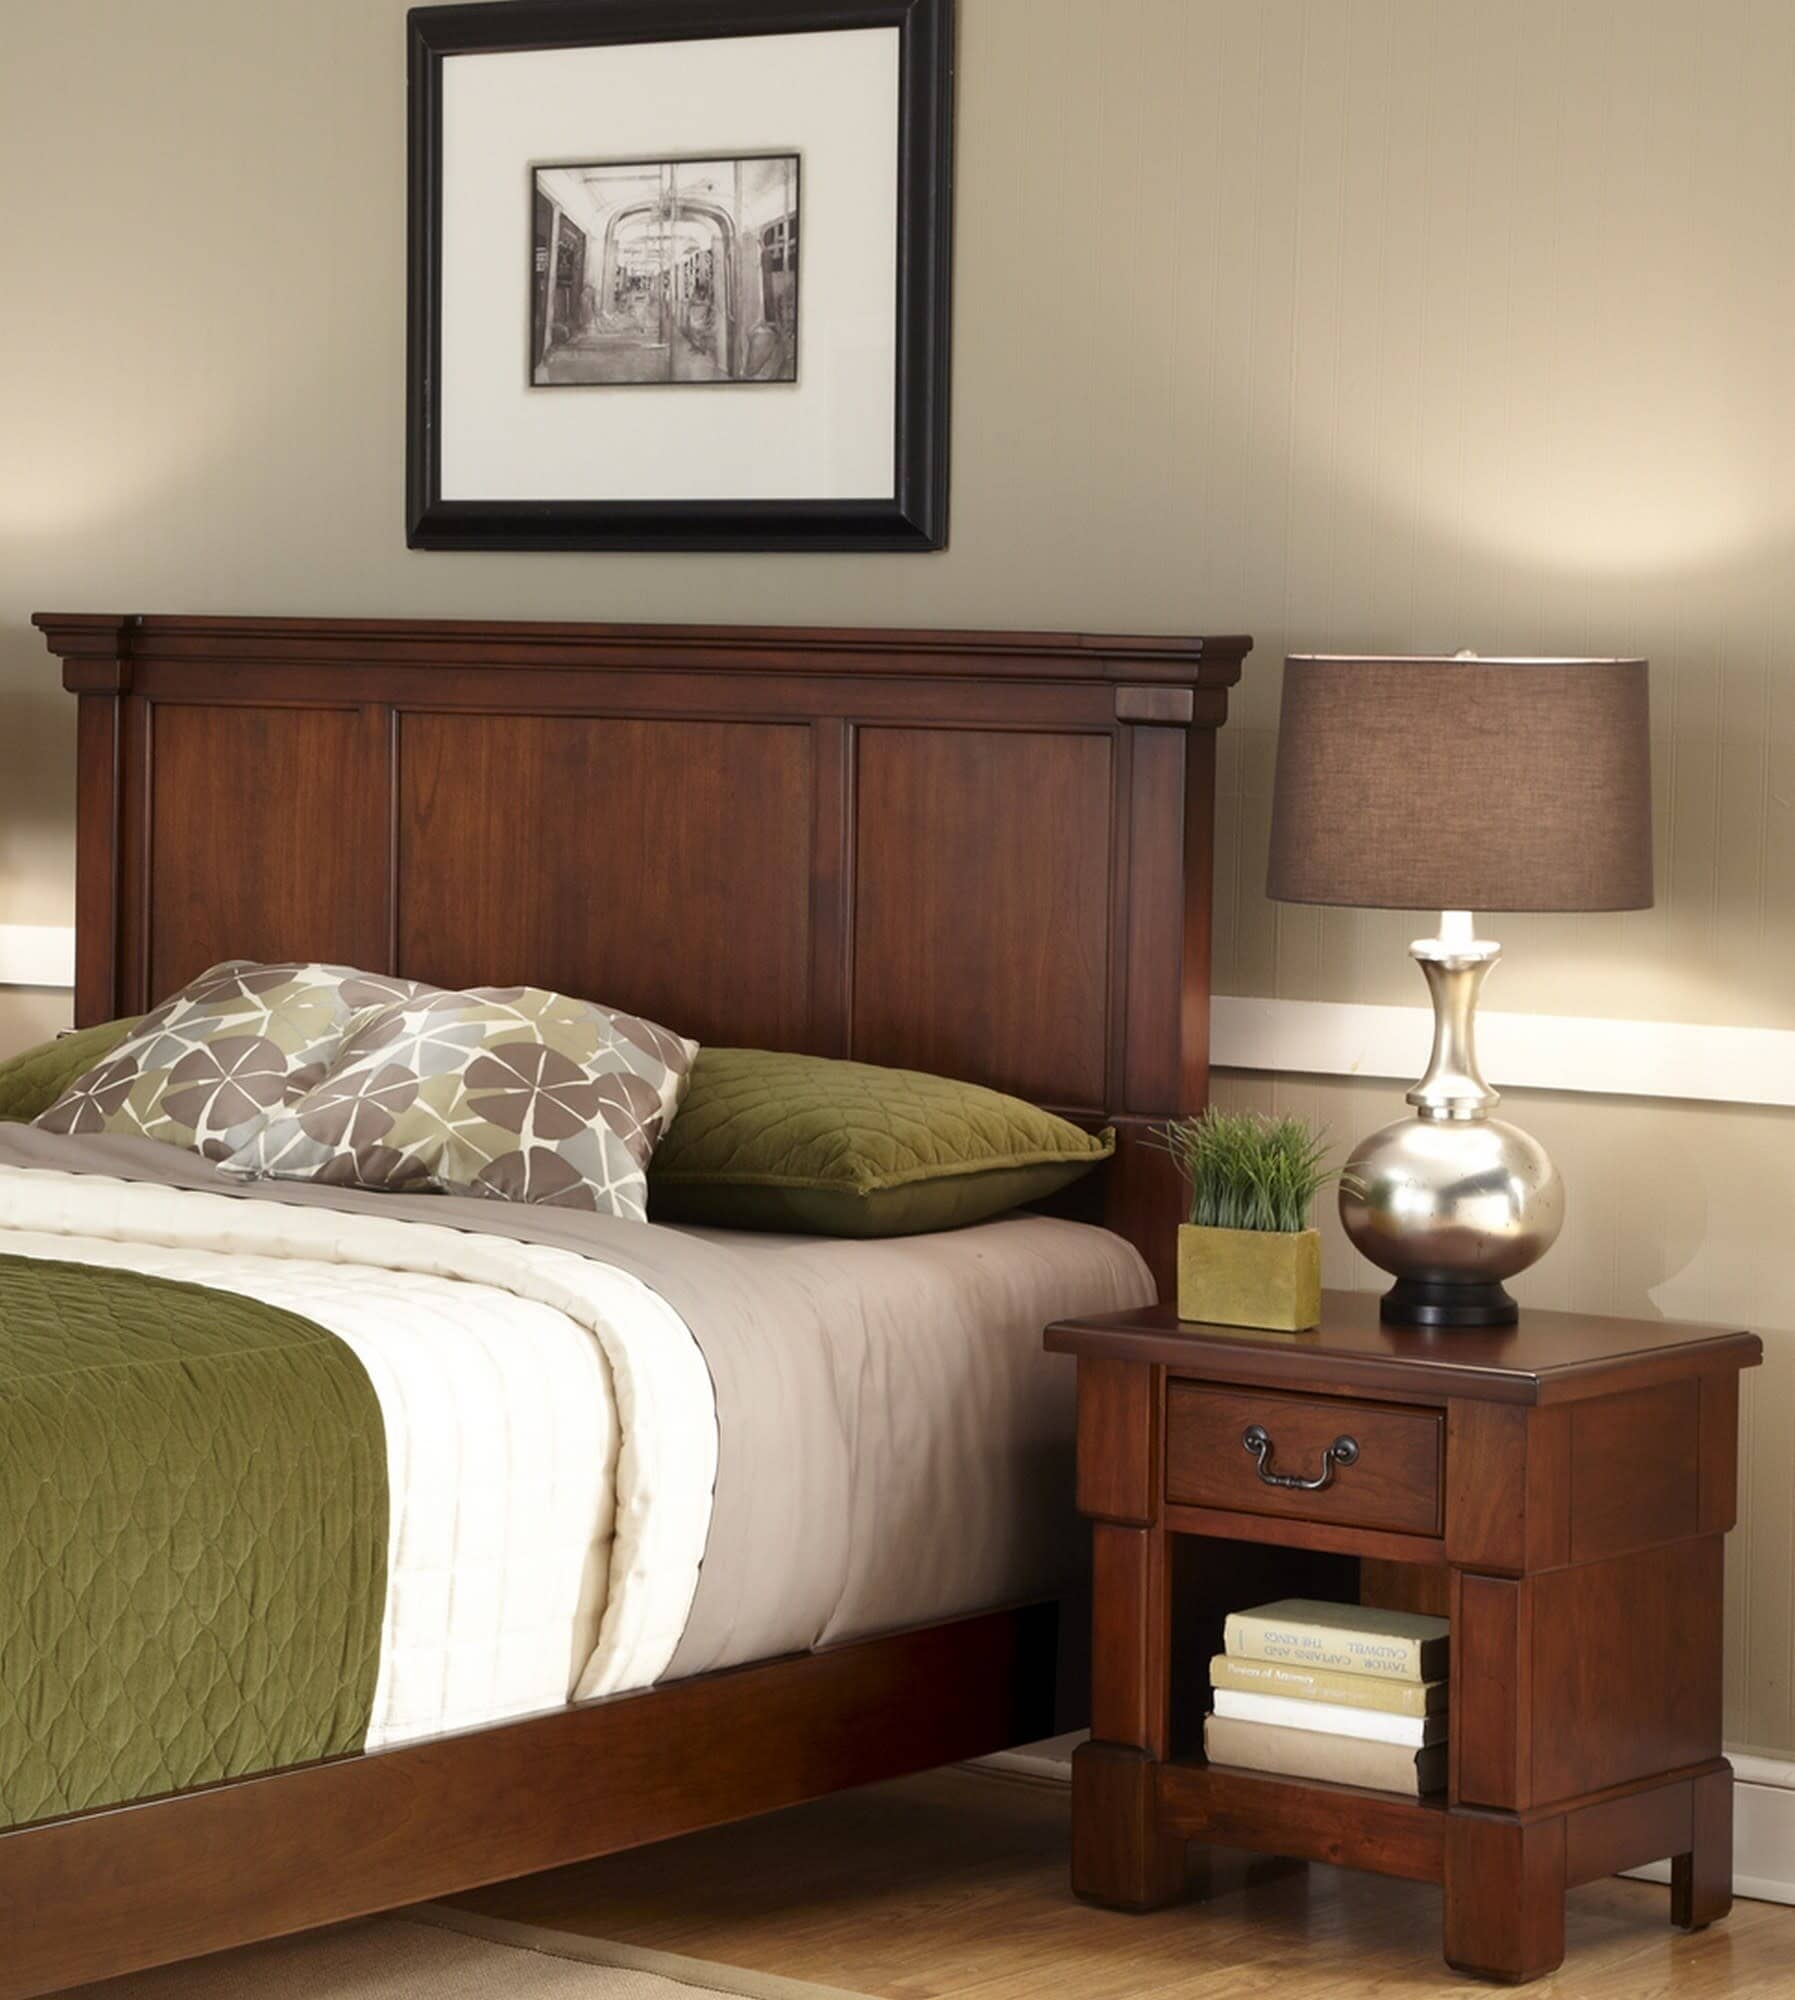 Traditional King Headboard and Nightstand By Aspen King Bed Set Aspen